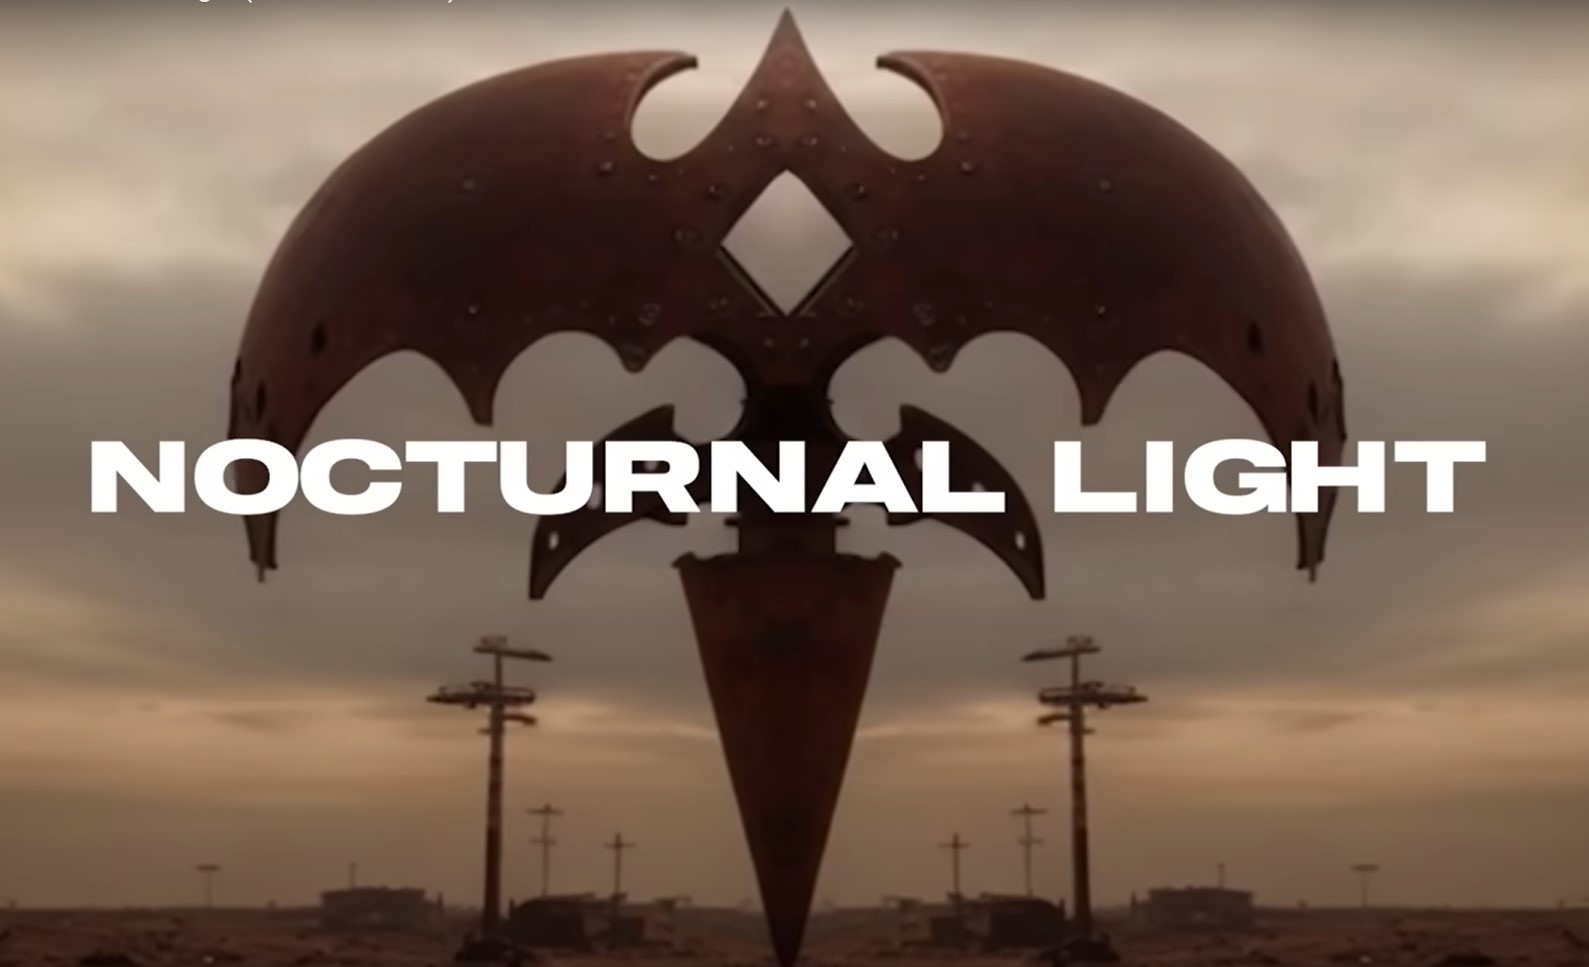 Watch Queensryche's New Video For "Nocturnal Light"